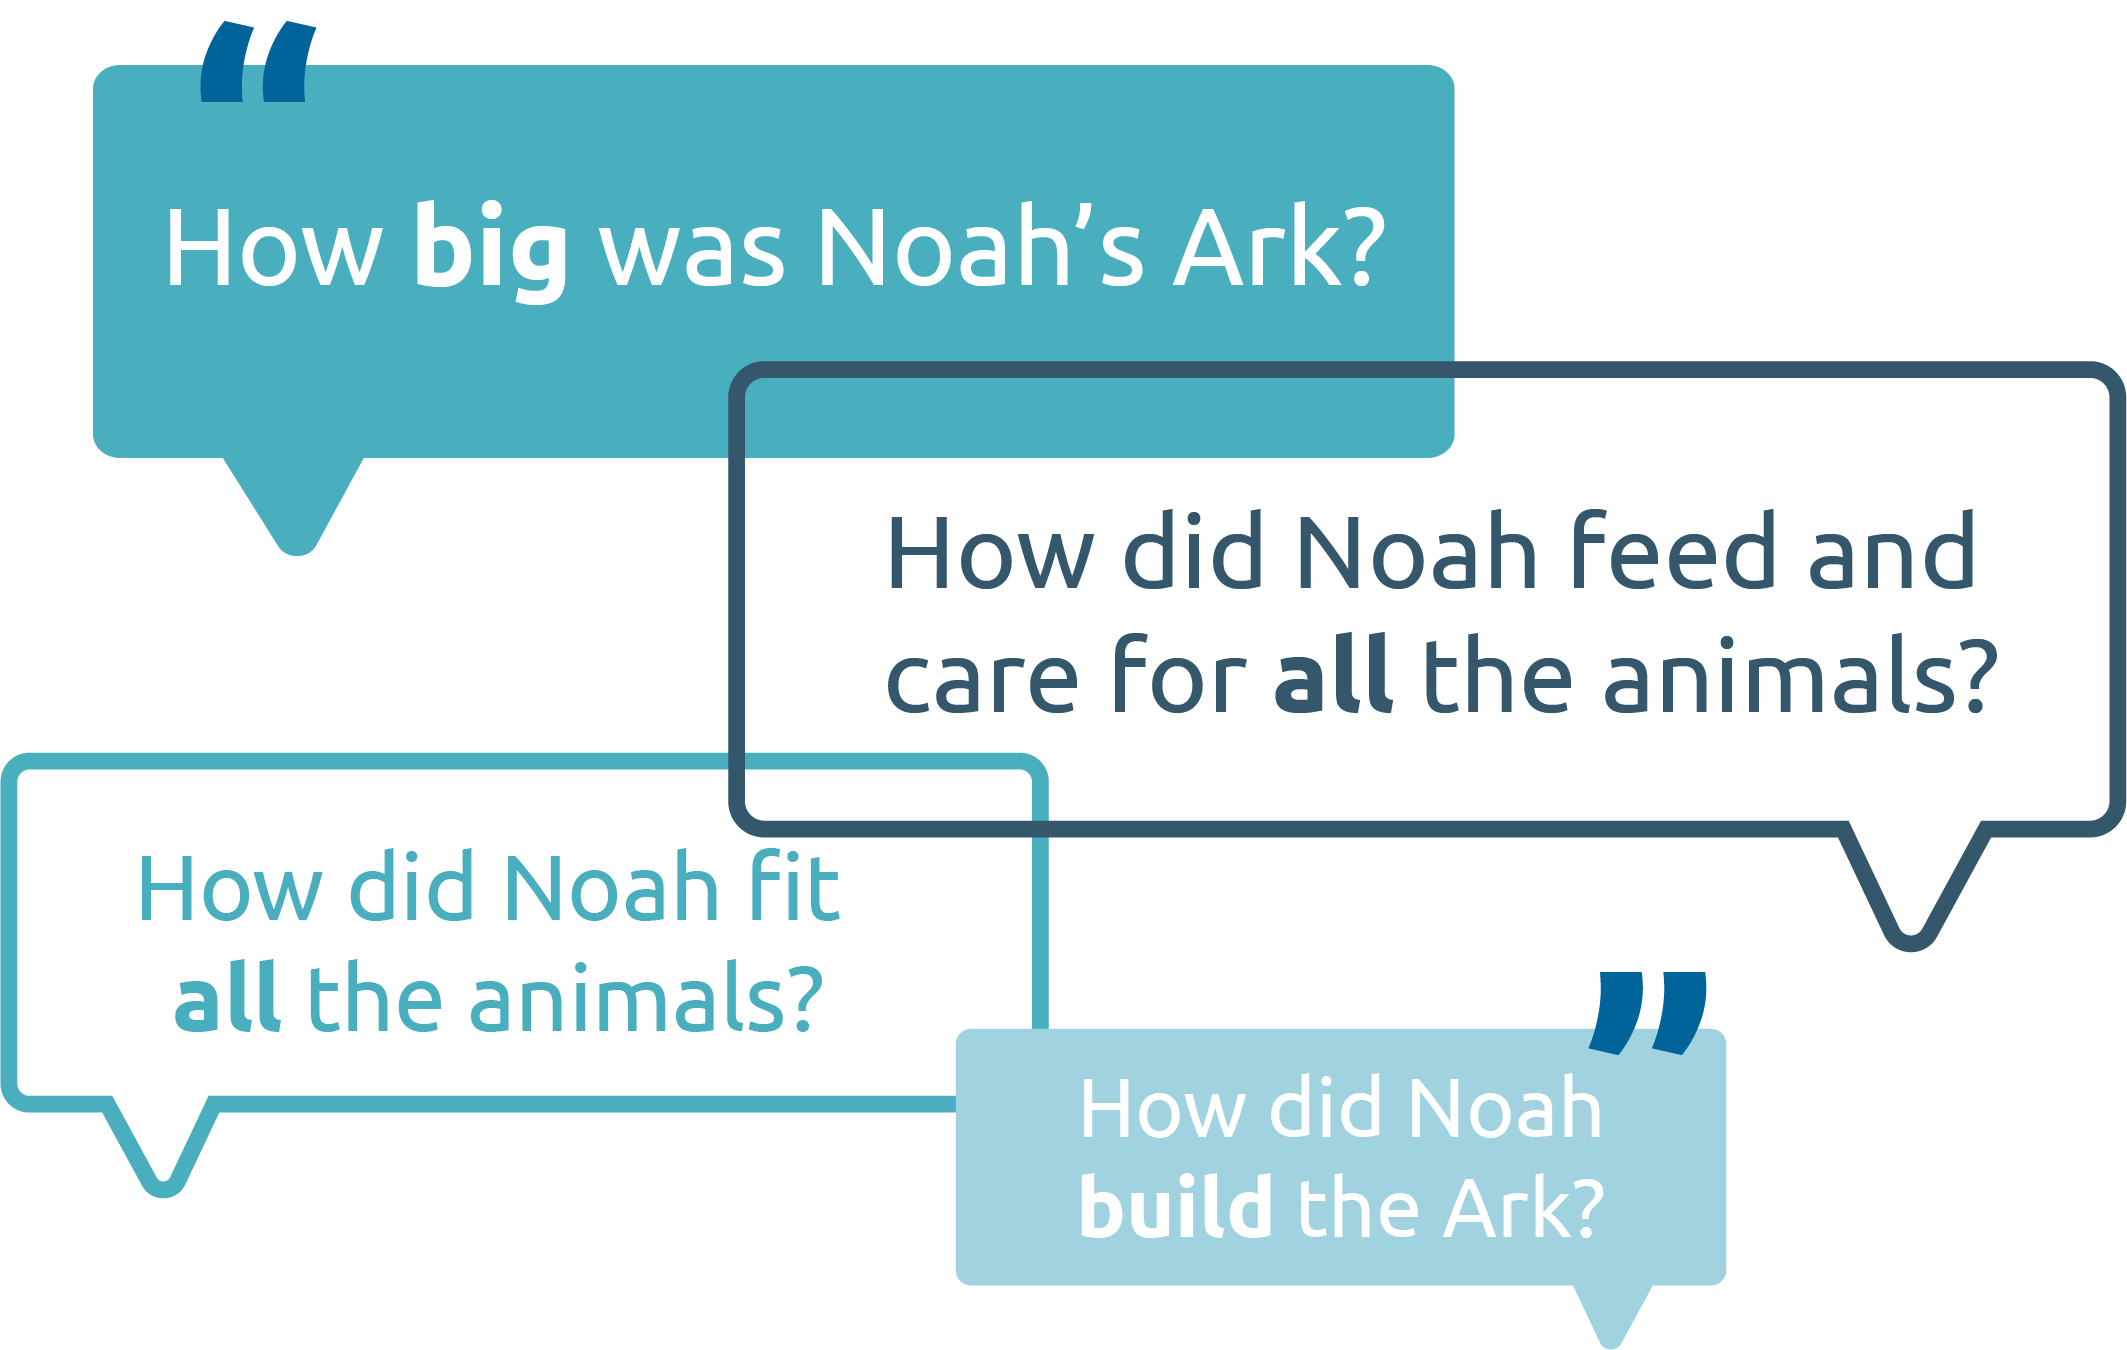 Thursday Thought - How did Noah and his family survive on the Ark?